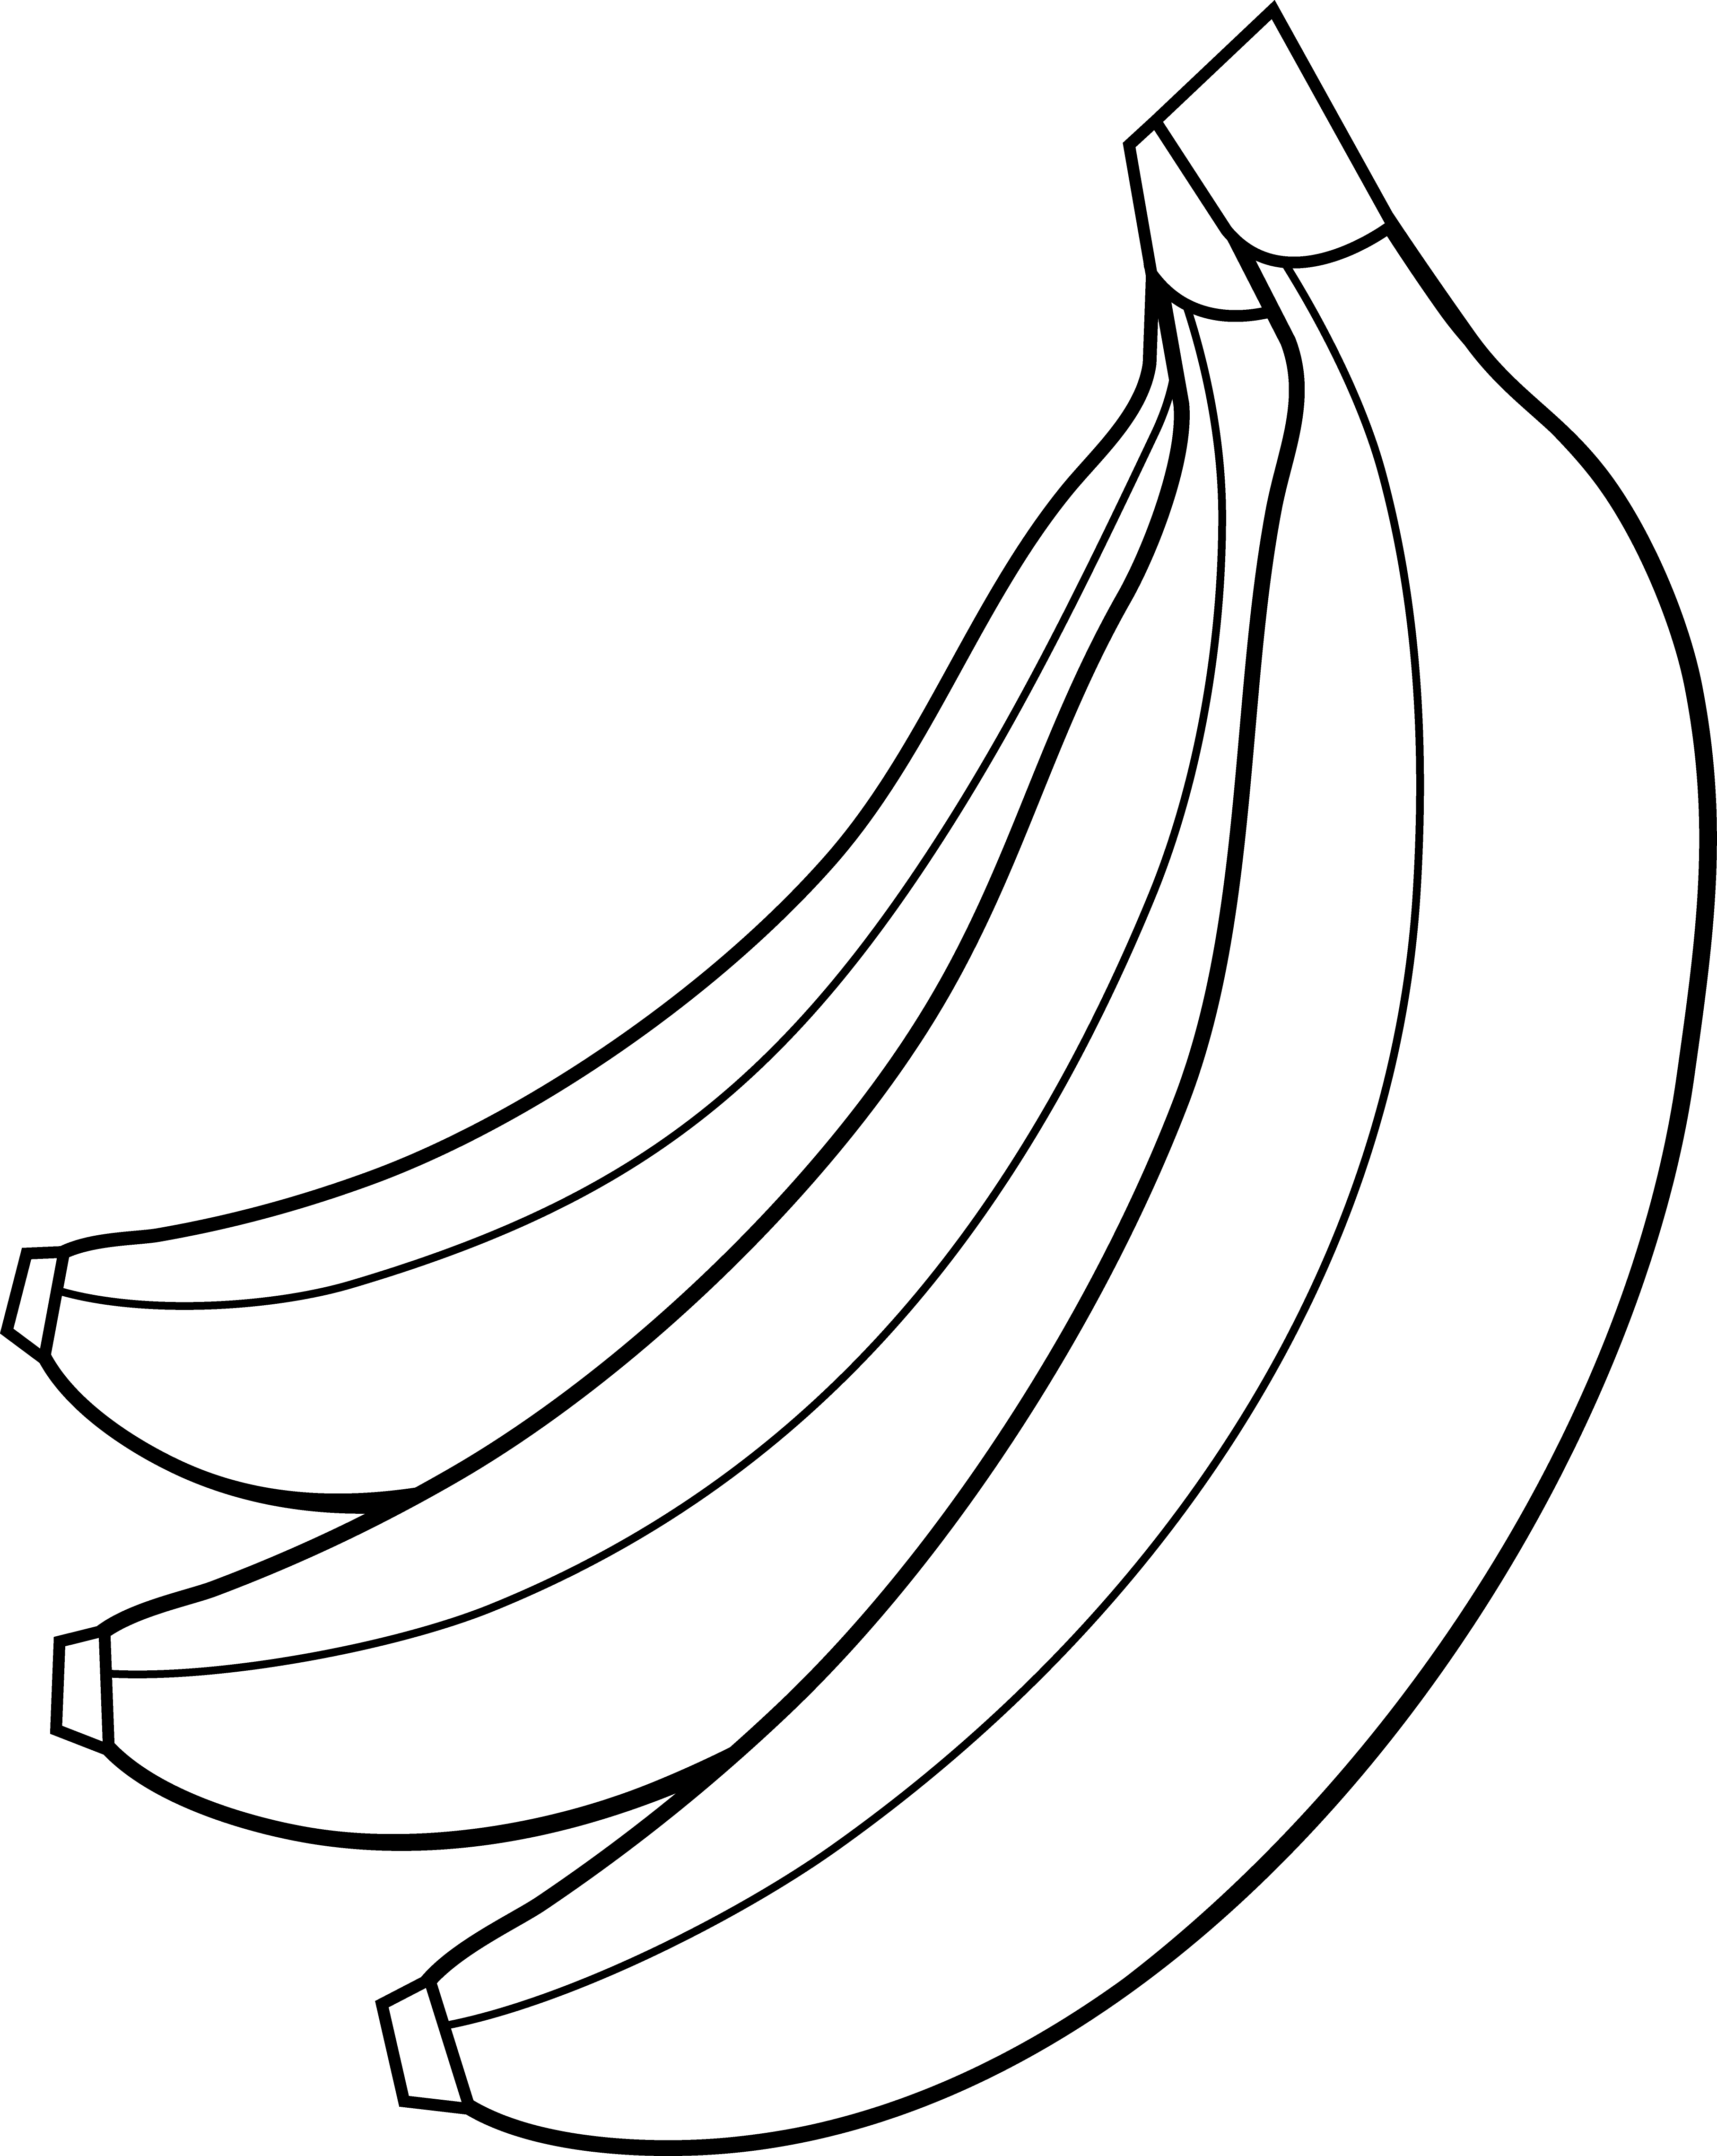 Colorable Bunch of Bananas - Free Clip Art